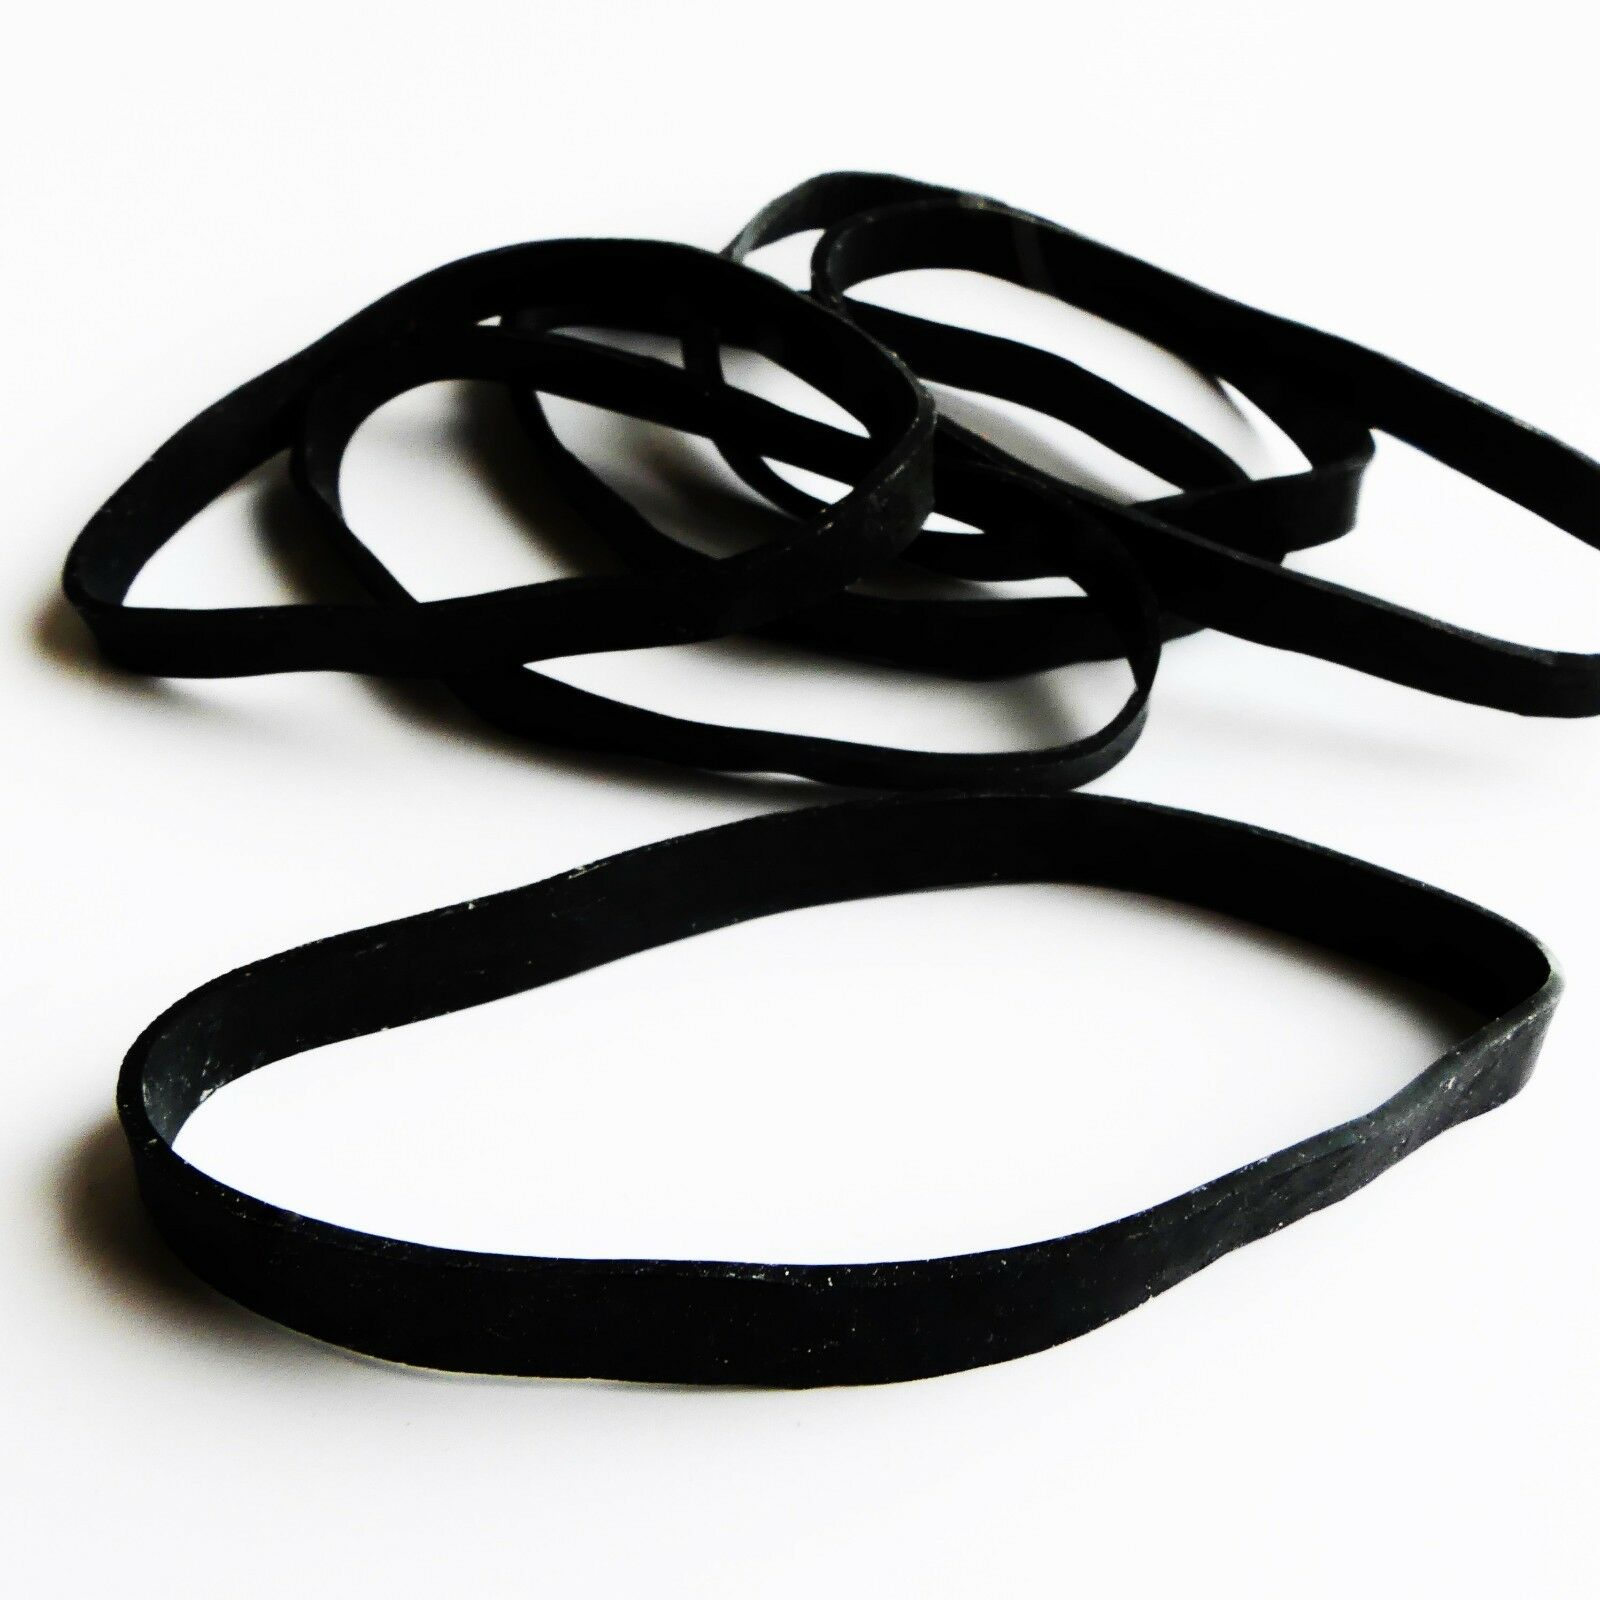 Heavy-duty Large Black Rubber Bands | Resist The Elements (20 Pack- 3.5” X 1/4”)